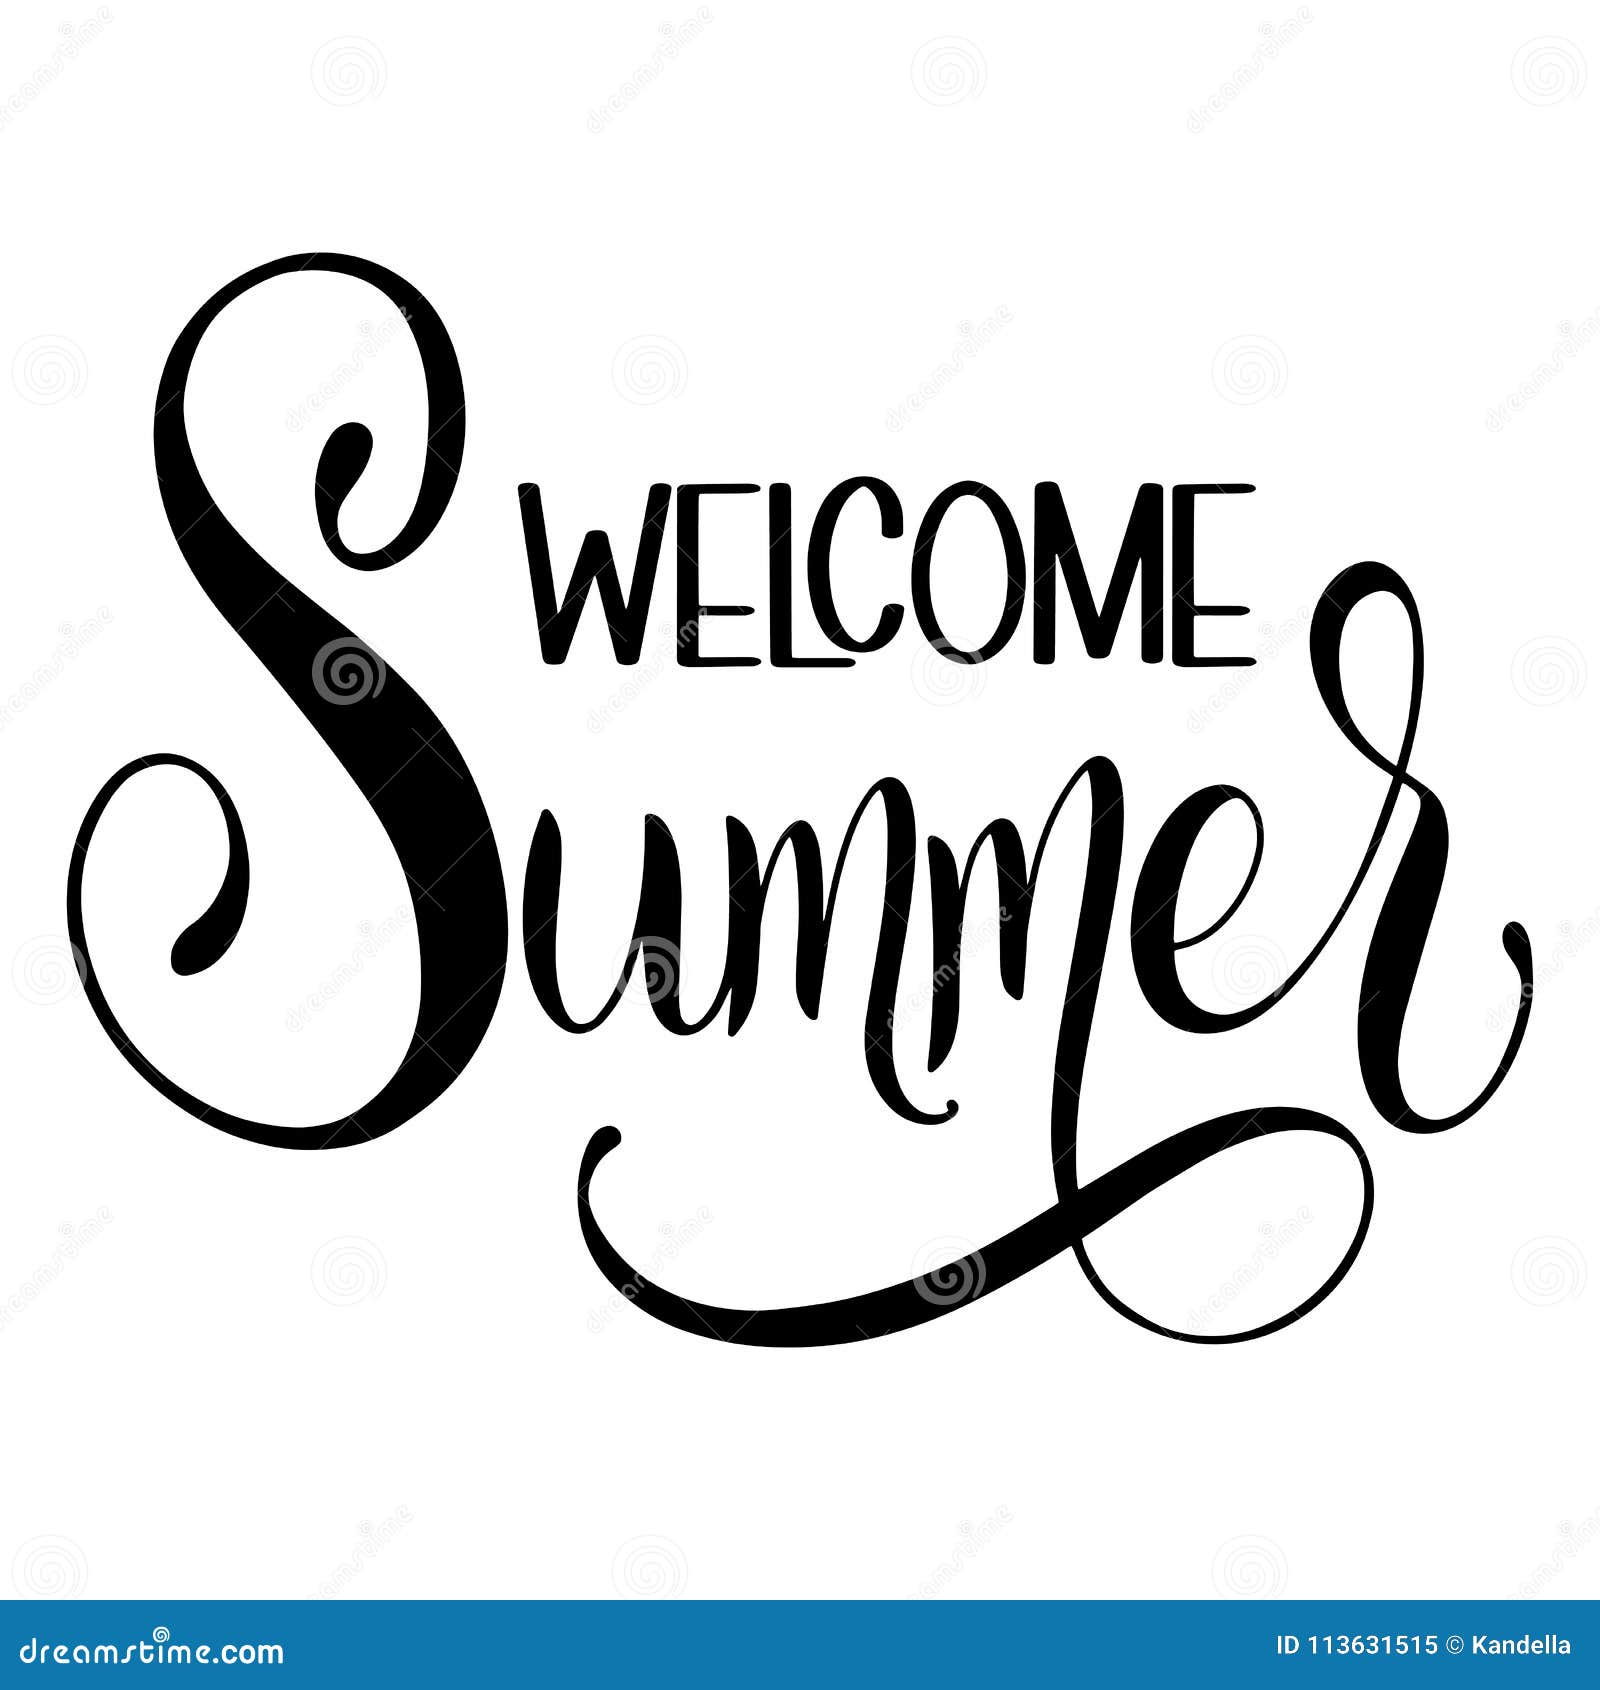 Welcome Summer lettering stock vector. Illustration of july - 113631515